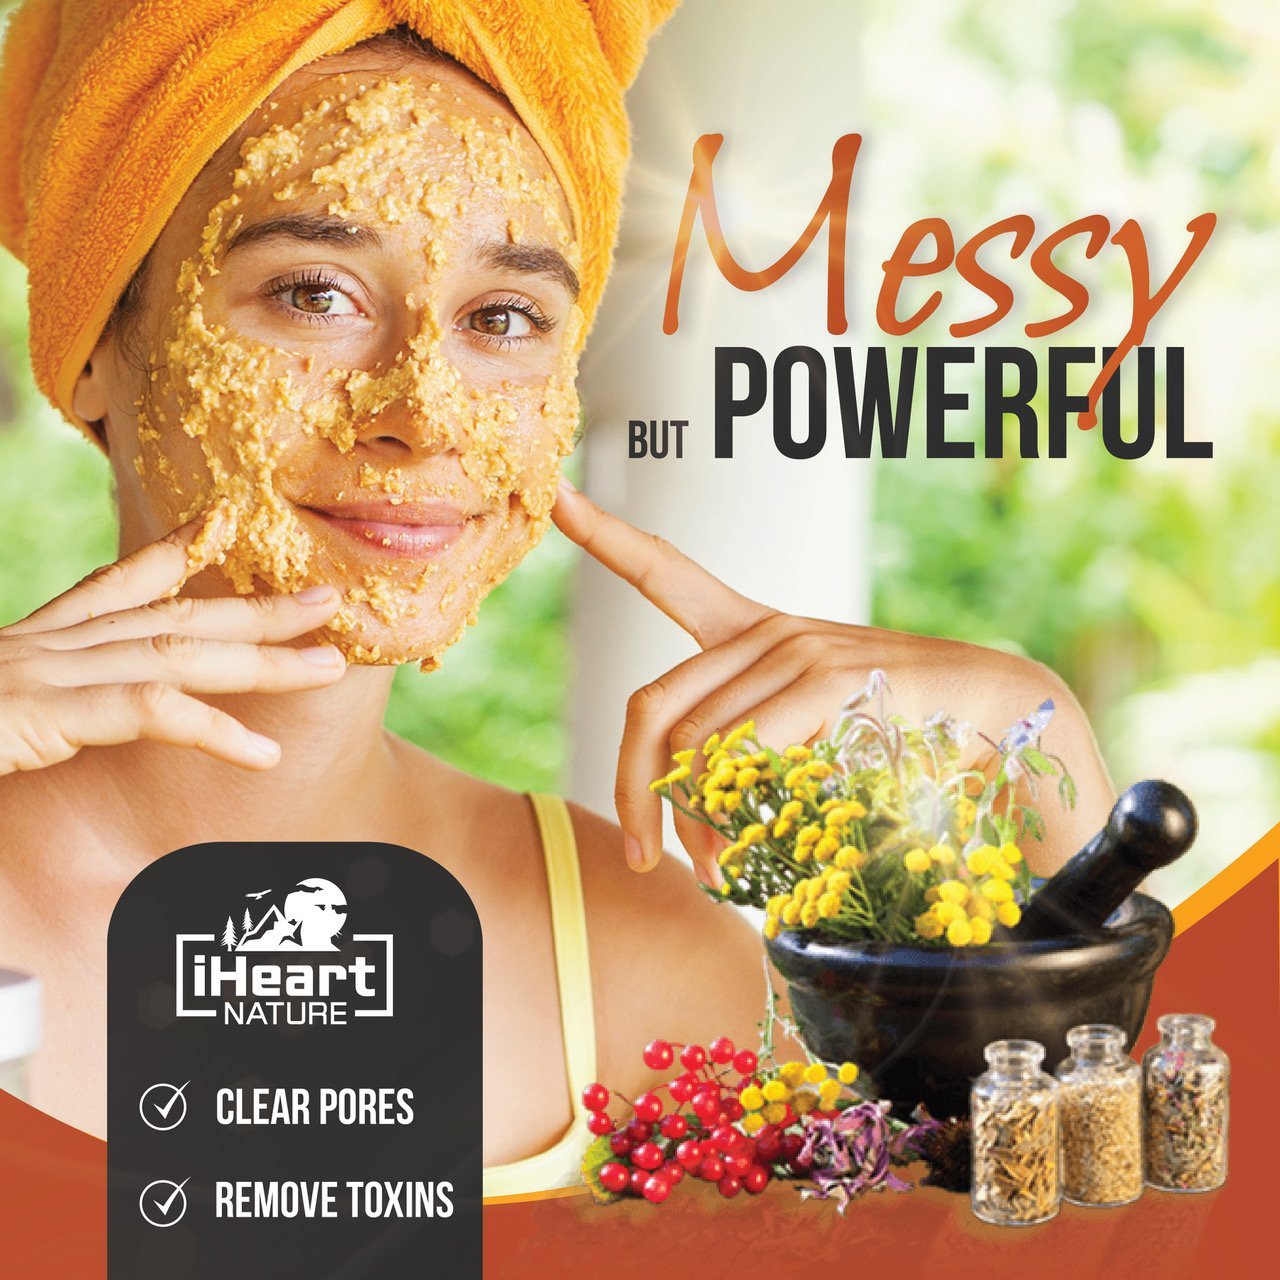 Turmeric Face Mask (DIY Powder) with Red Sandalwood and Fenugreek - Natural Clay Powder Blend for Bright Clear Smooth Skin Glow - iHeart Nature